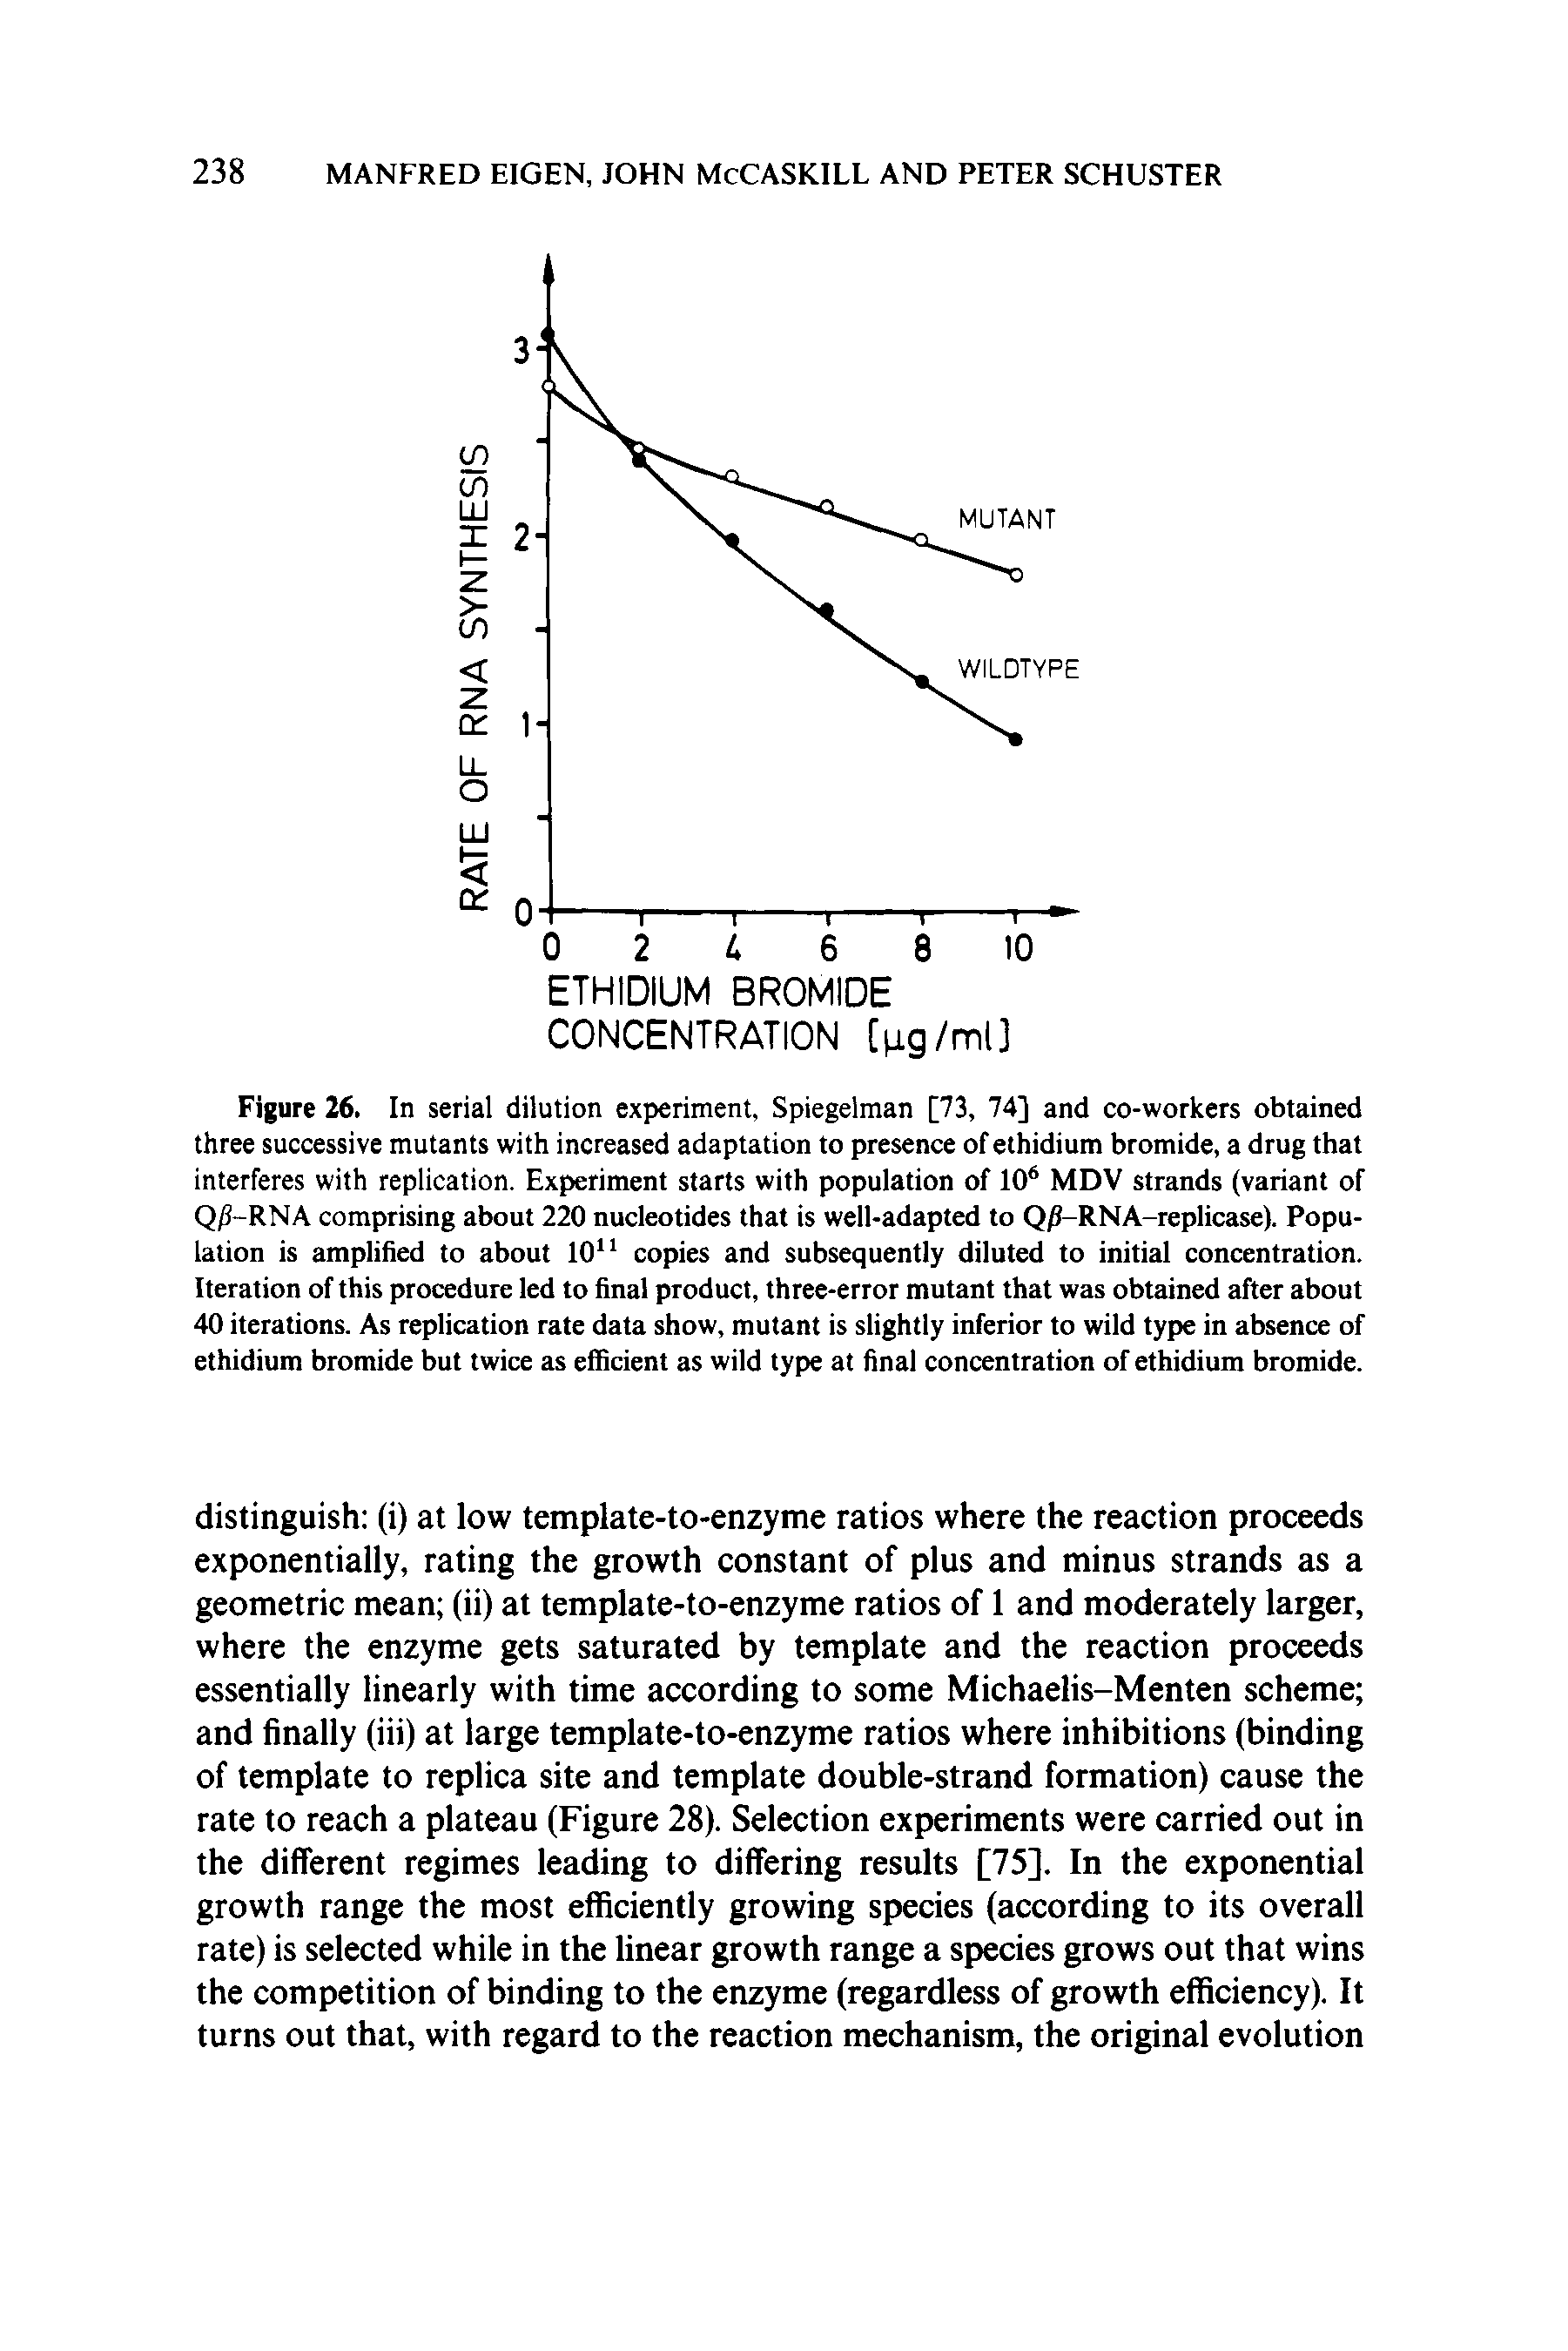 Figure 26. In serial dilution experiment, Spiegelman [73, 74] and co-workers obtained three successive mutants with increased adaptation to presence of ethidium bromide, a drug that interferes with replication. Experiment starts with population of 10 MDV strands (variant of Q -RNA comprising about 220 nucleotides that is well-adapted to Q -RNA-replicase). Population is amplified to about 10 copies and subsequently diluted to initial concentration. Iteration of this procedure led to final product, three-error mutant that was obtained after about 40 iterations. As replication rate data show, mutant is slightly inferior to wild type in absence of ethidium bromide but twice as efficient as wild type at final concentration of ethidium bromide.